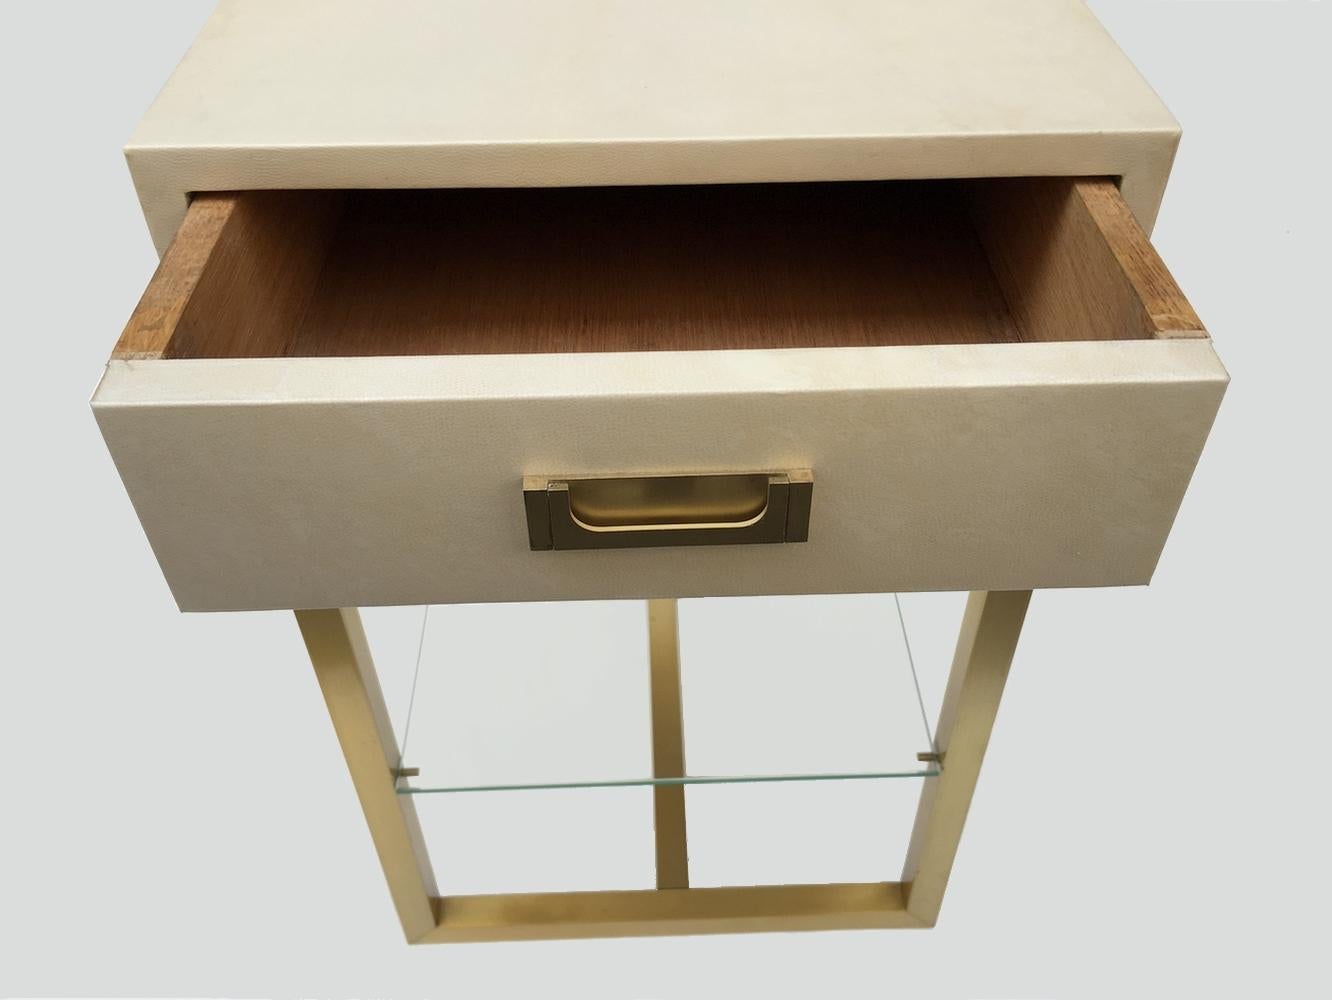 Pair of pedestal tables / end tables by Guy Lefevre for Maison Jansen, France 1970.
The base is in square patinated brass tube. the tray hiding a drawer is entirely wrapped in parchment.
A glass shelf rests on brass tabs at a third of the height